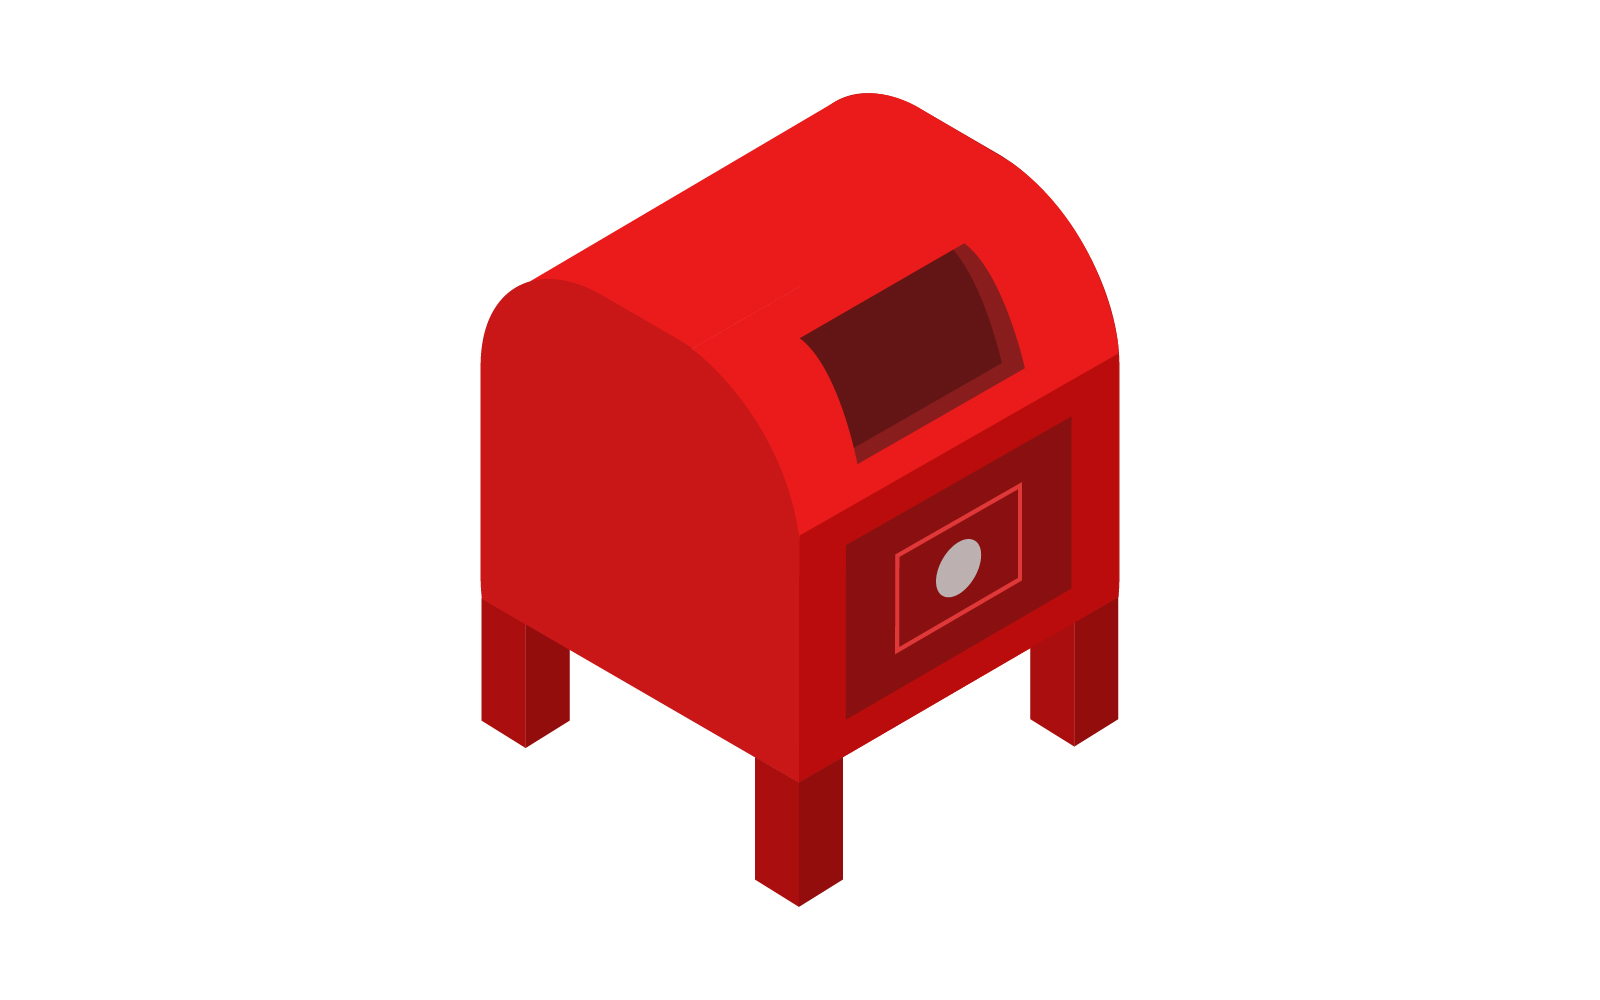 Mail box isometric and illustrated on a white background